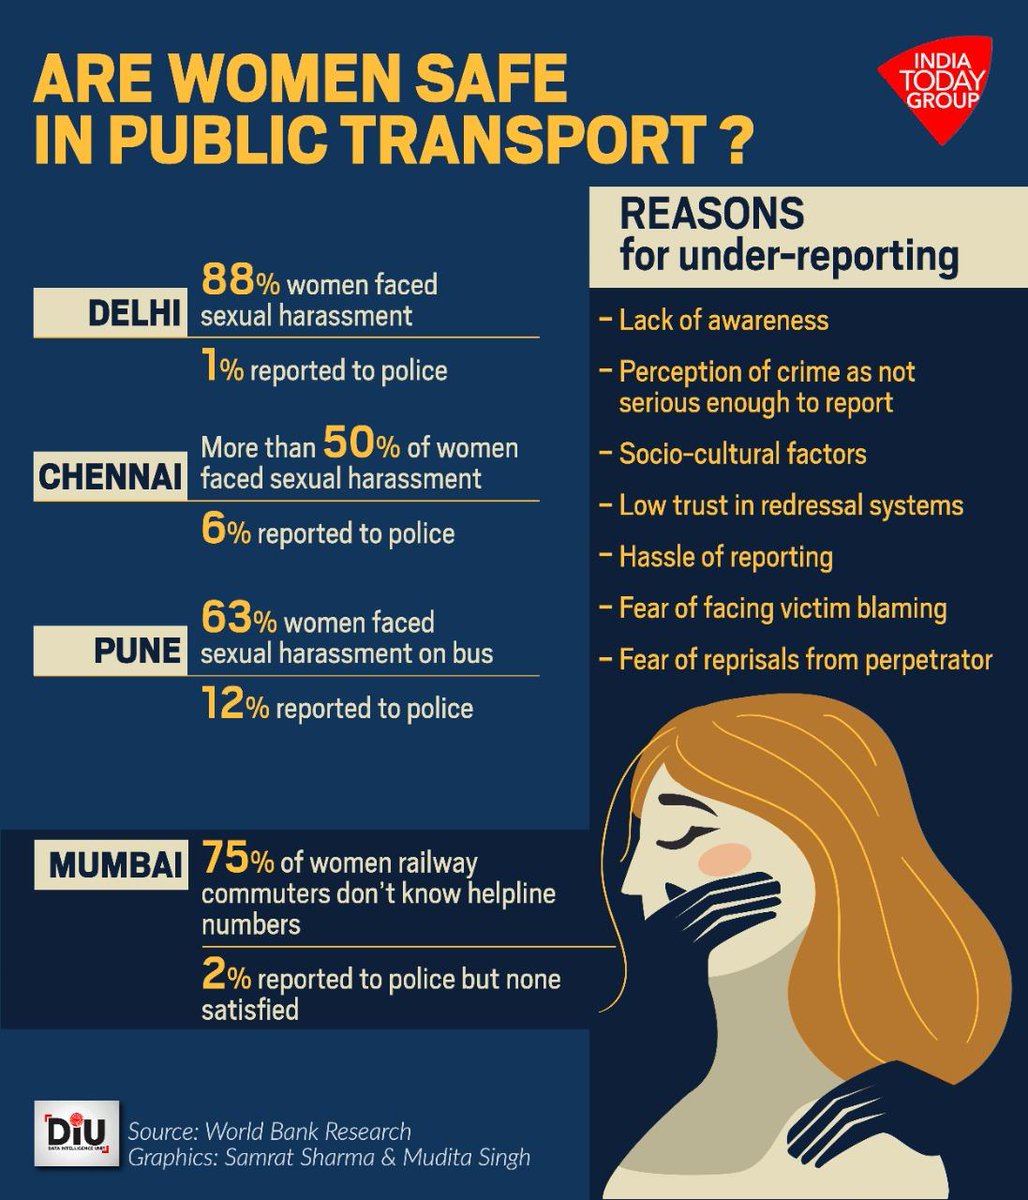 “Evidence from Indian cities shows that while the prevalence of sexual harassment on public transport and in public spaces is high, reporting and subsequent actions taken for redressal are perceived to be low.' Quoted rom the new @wb_research guidance brief on #sexualharassment